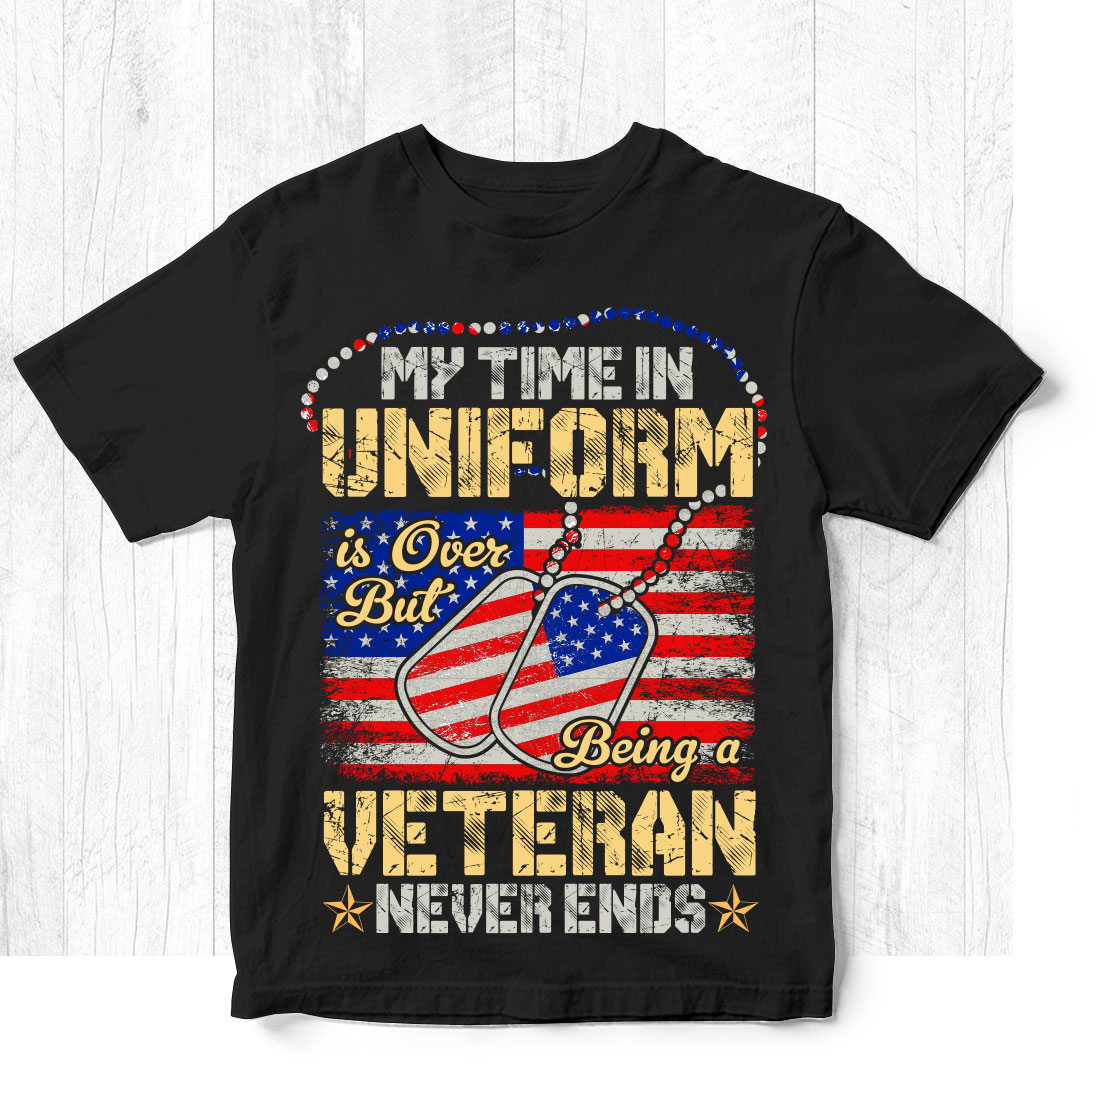 Black t - shirt with an american flag design.